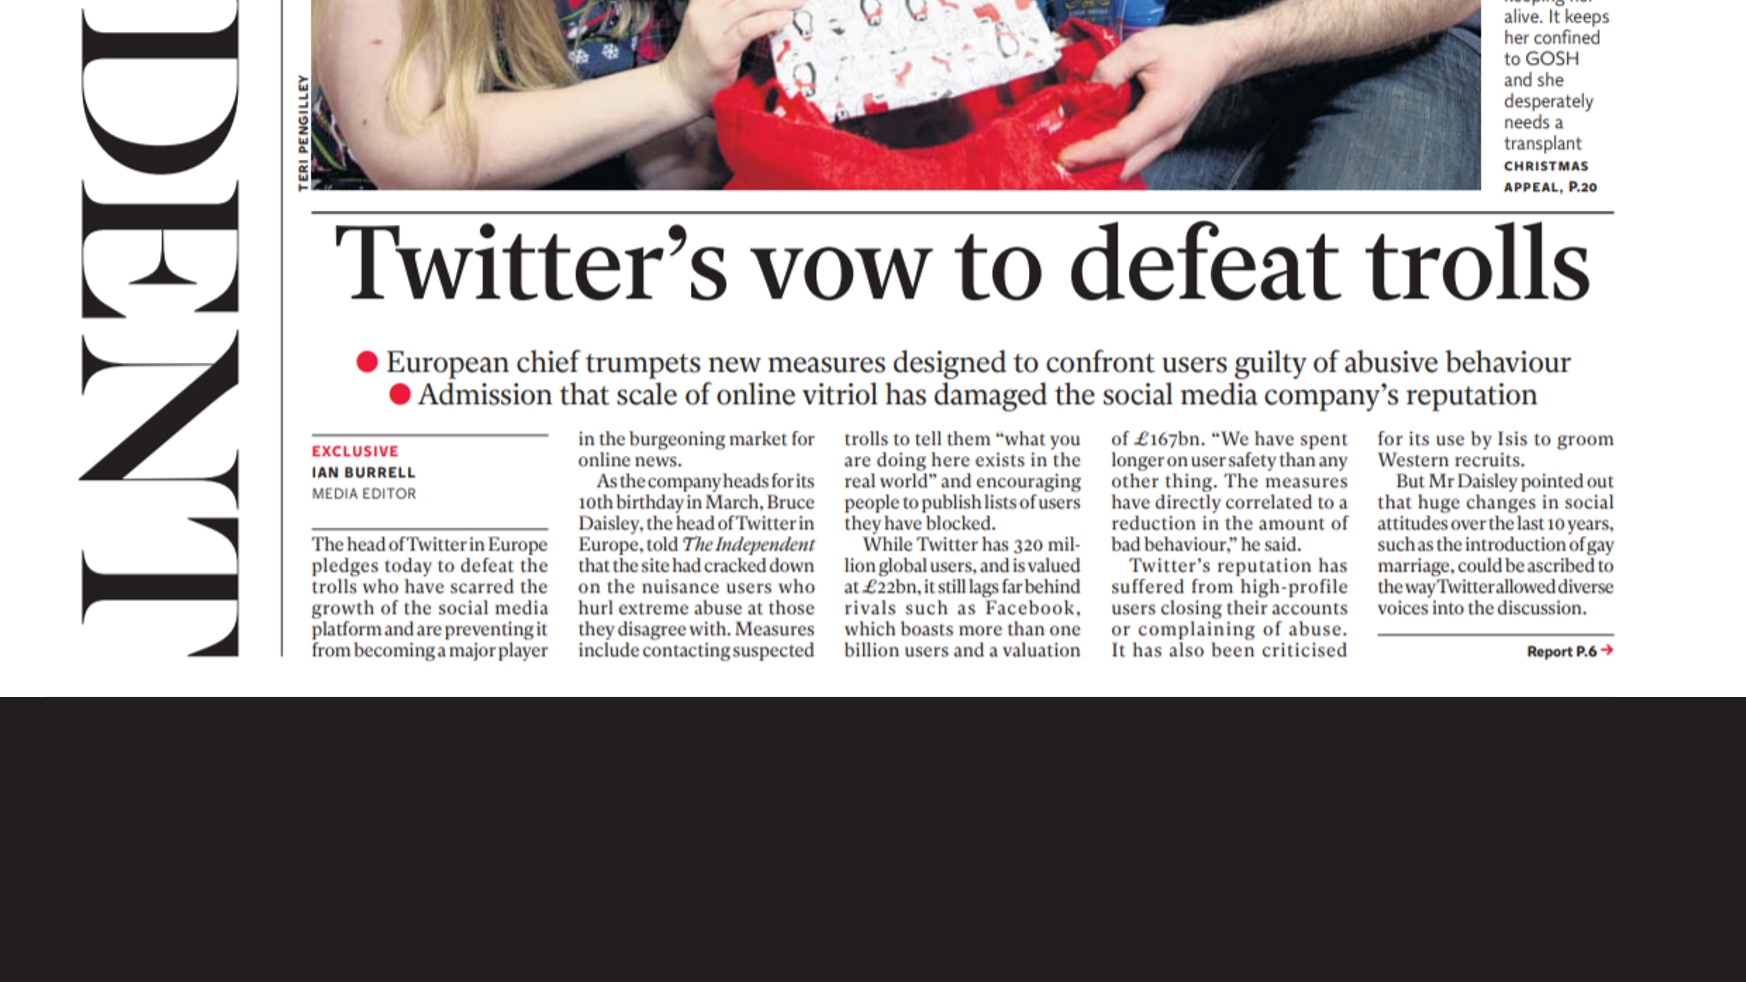 Twitter's vow to defeat trolls in The Independent